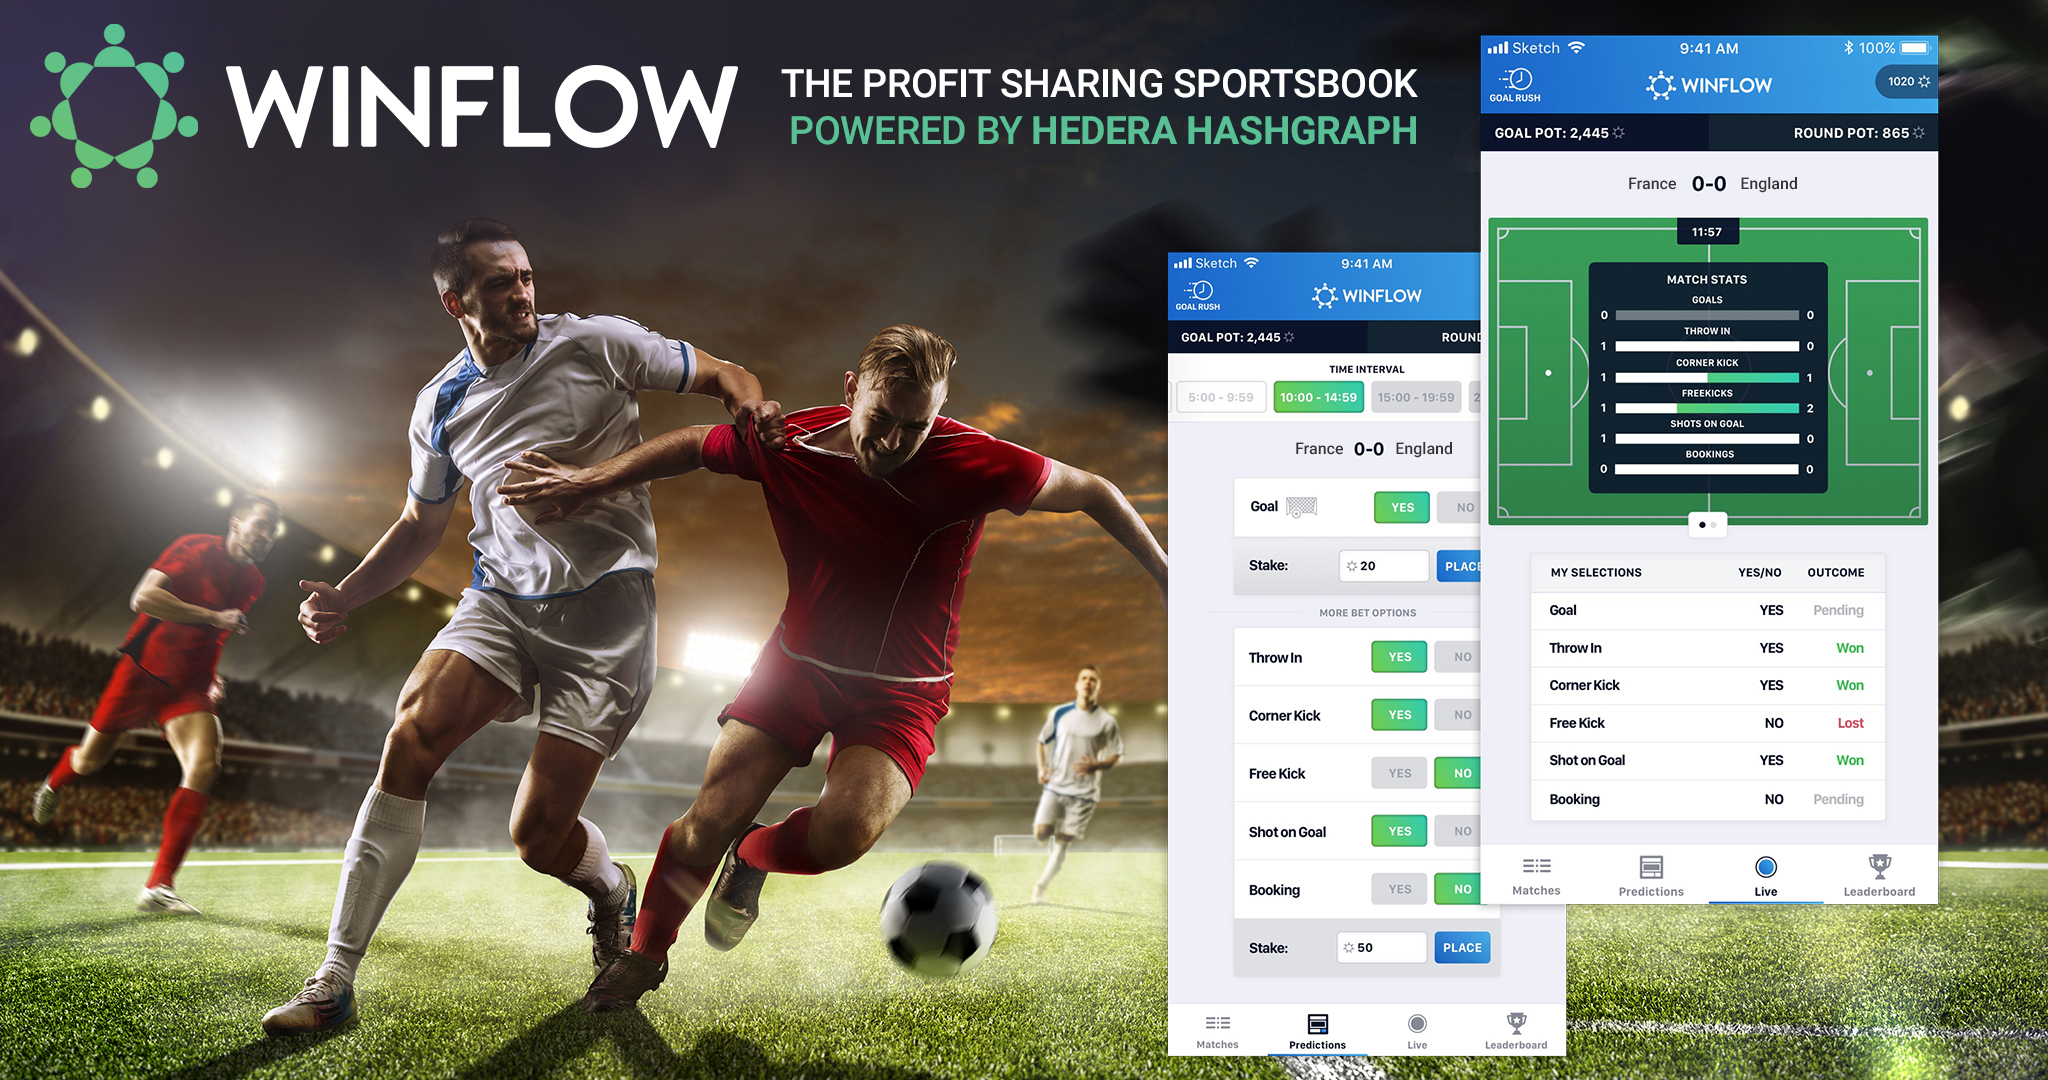 Winflow Profit Sharing Sportsbook On Hedera Hashgraph Poised To